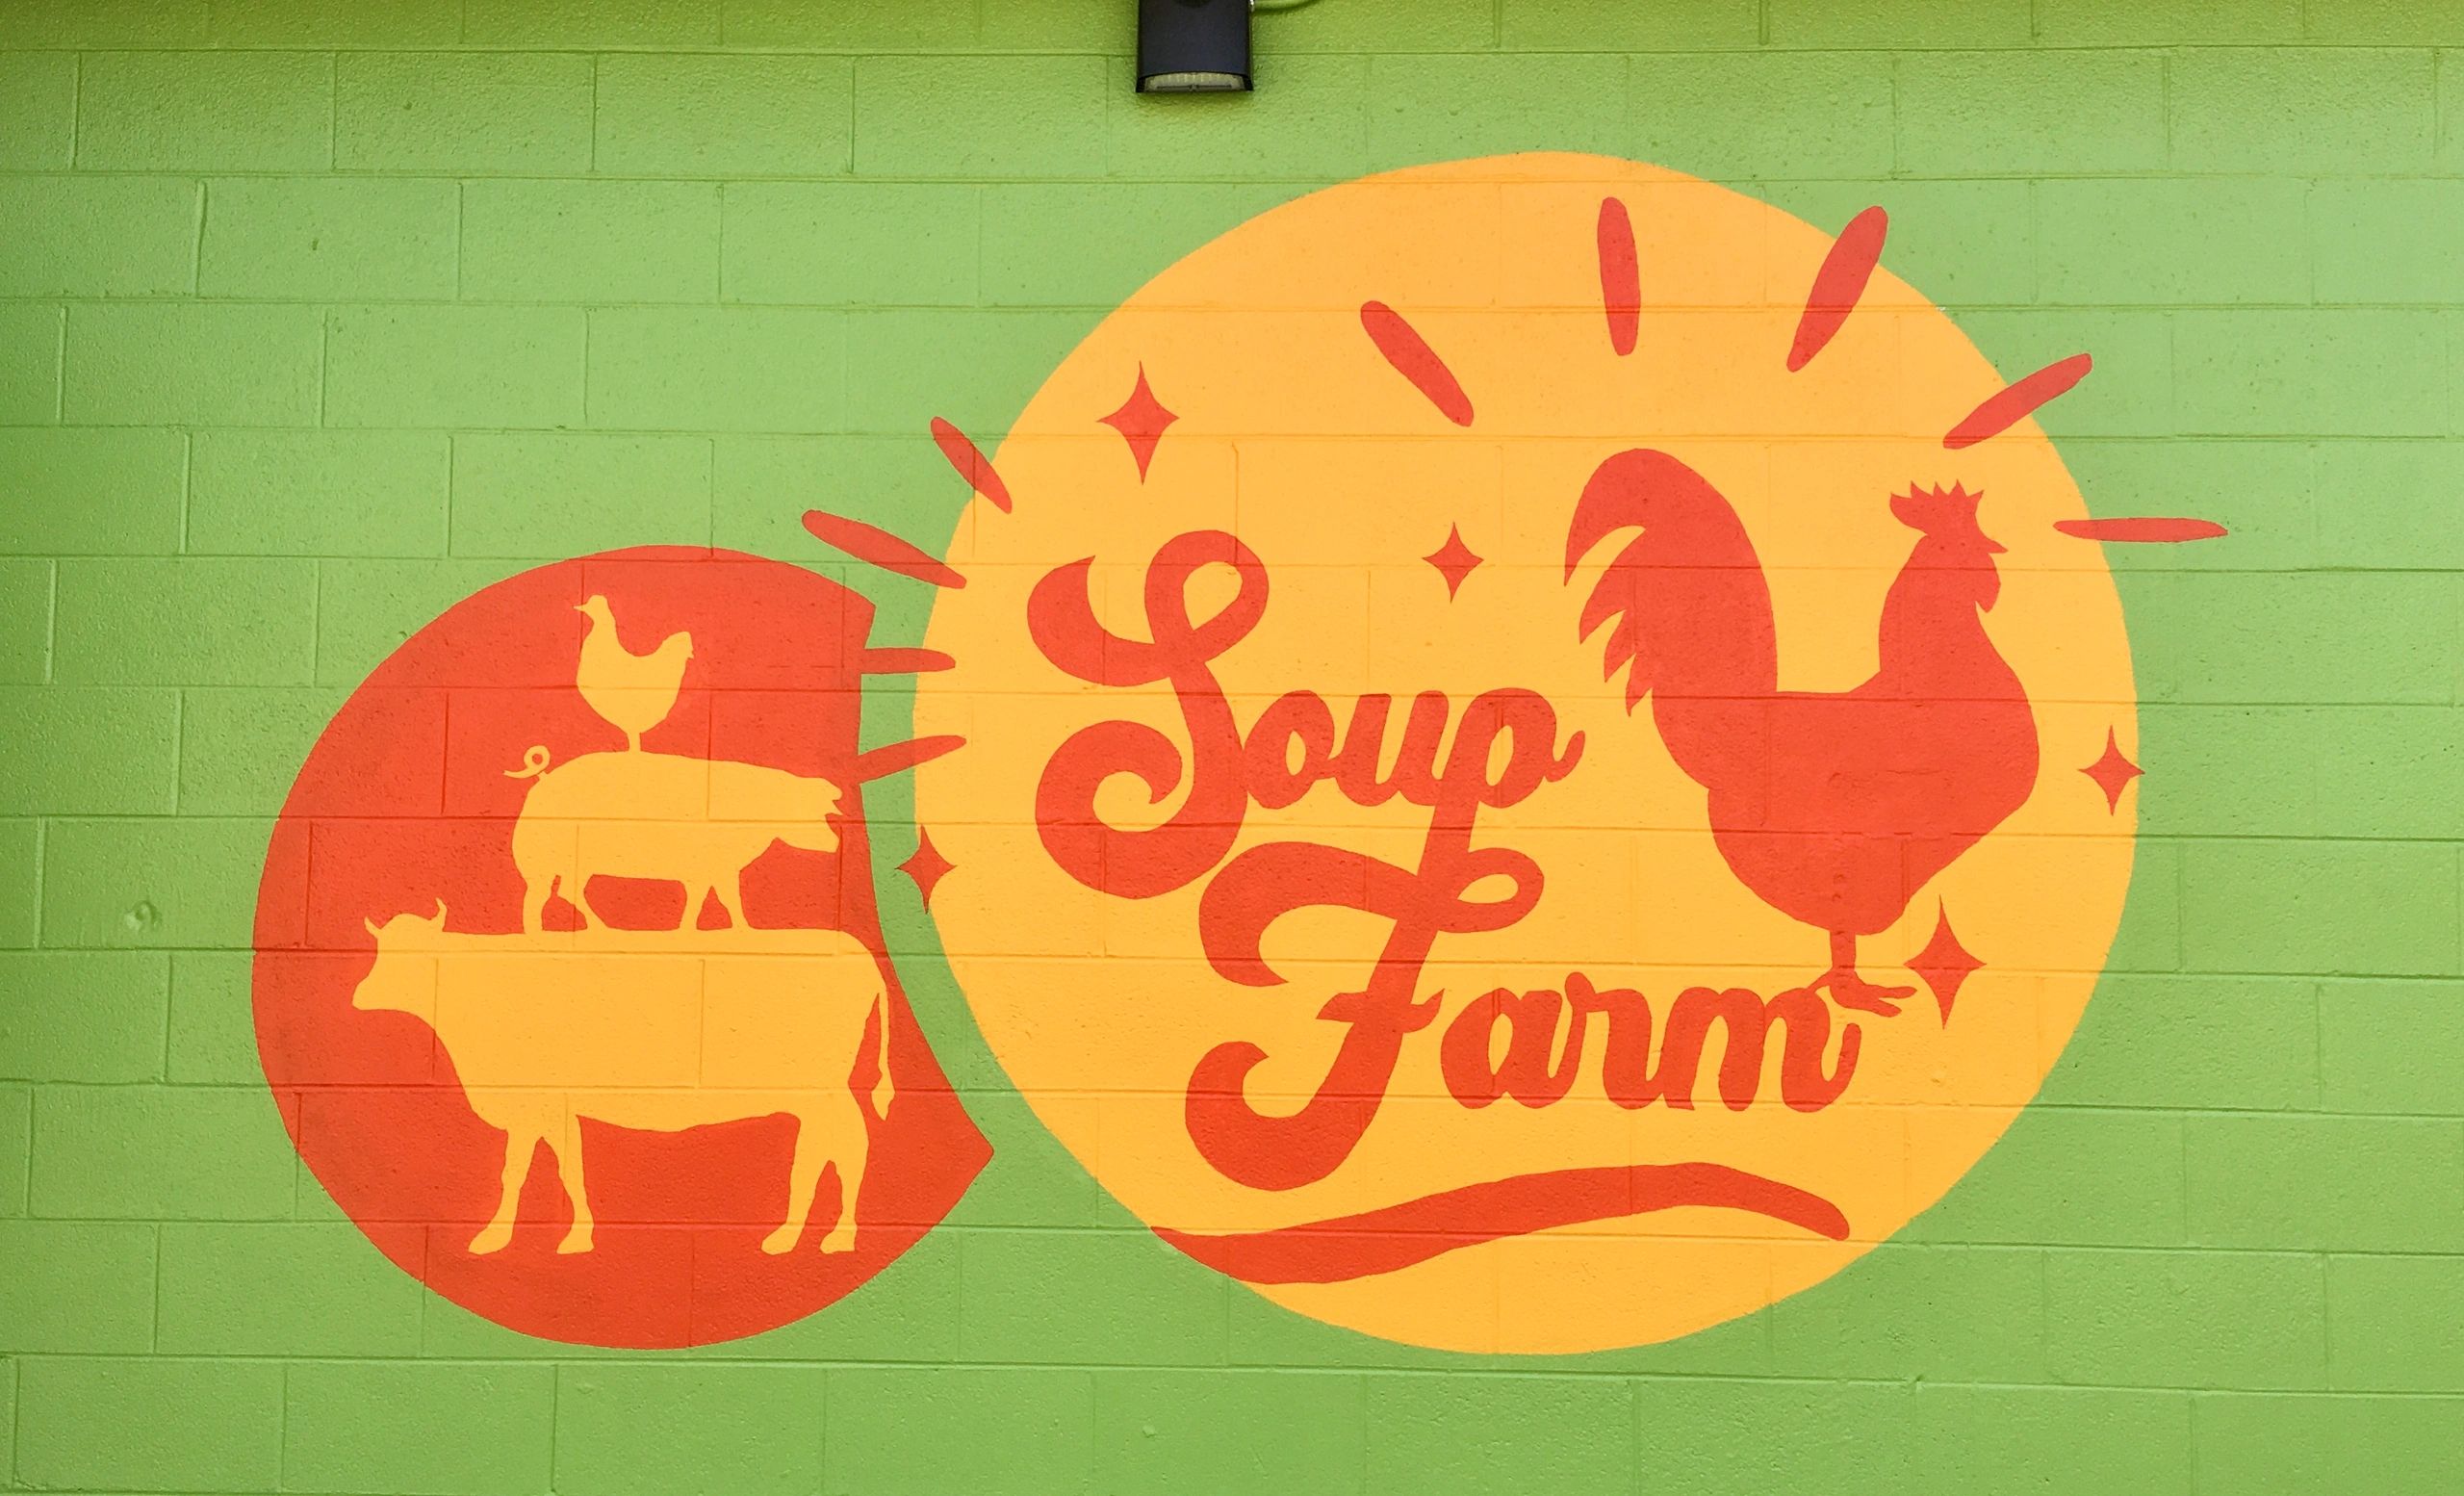 Green brick background wall with yellow and orange Soup Farm logo painted by Bridey O'Brien